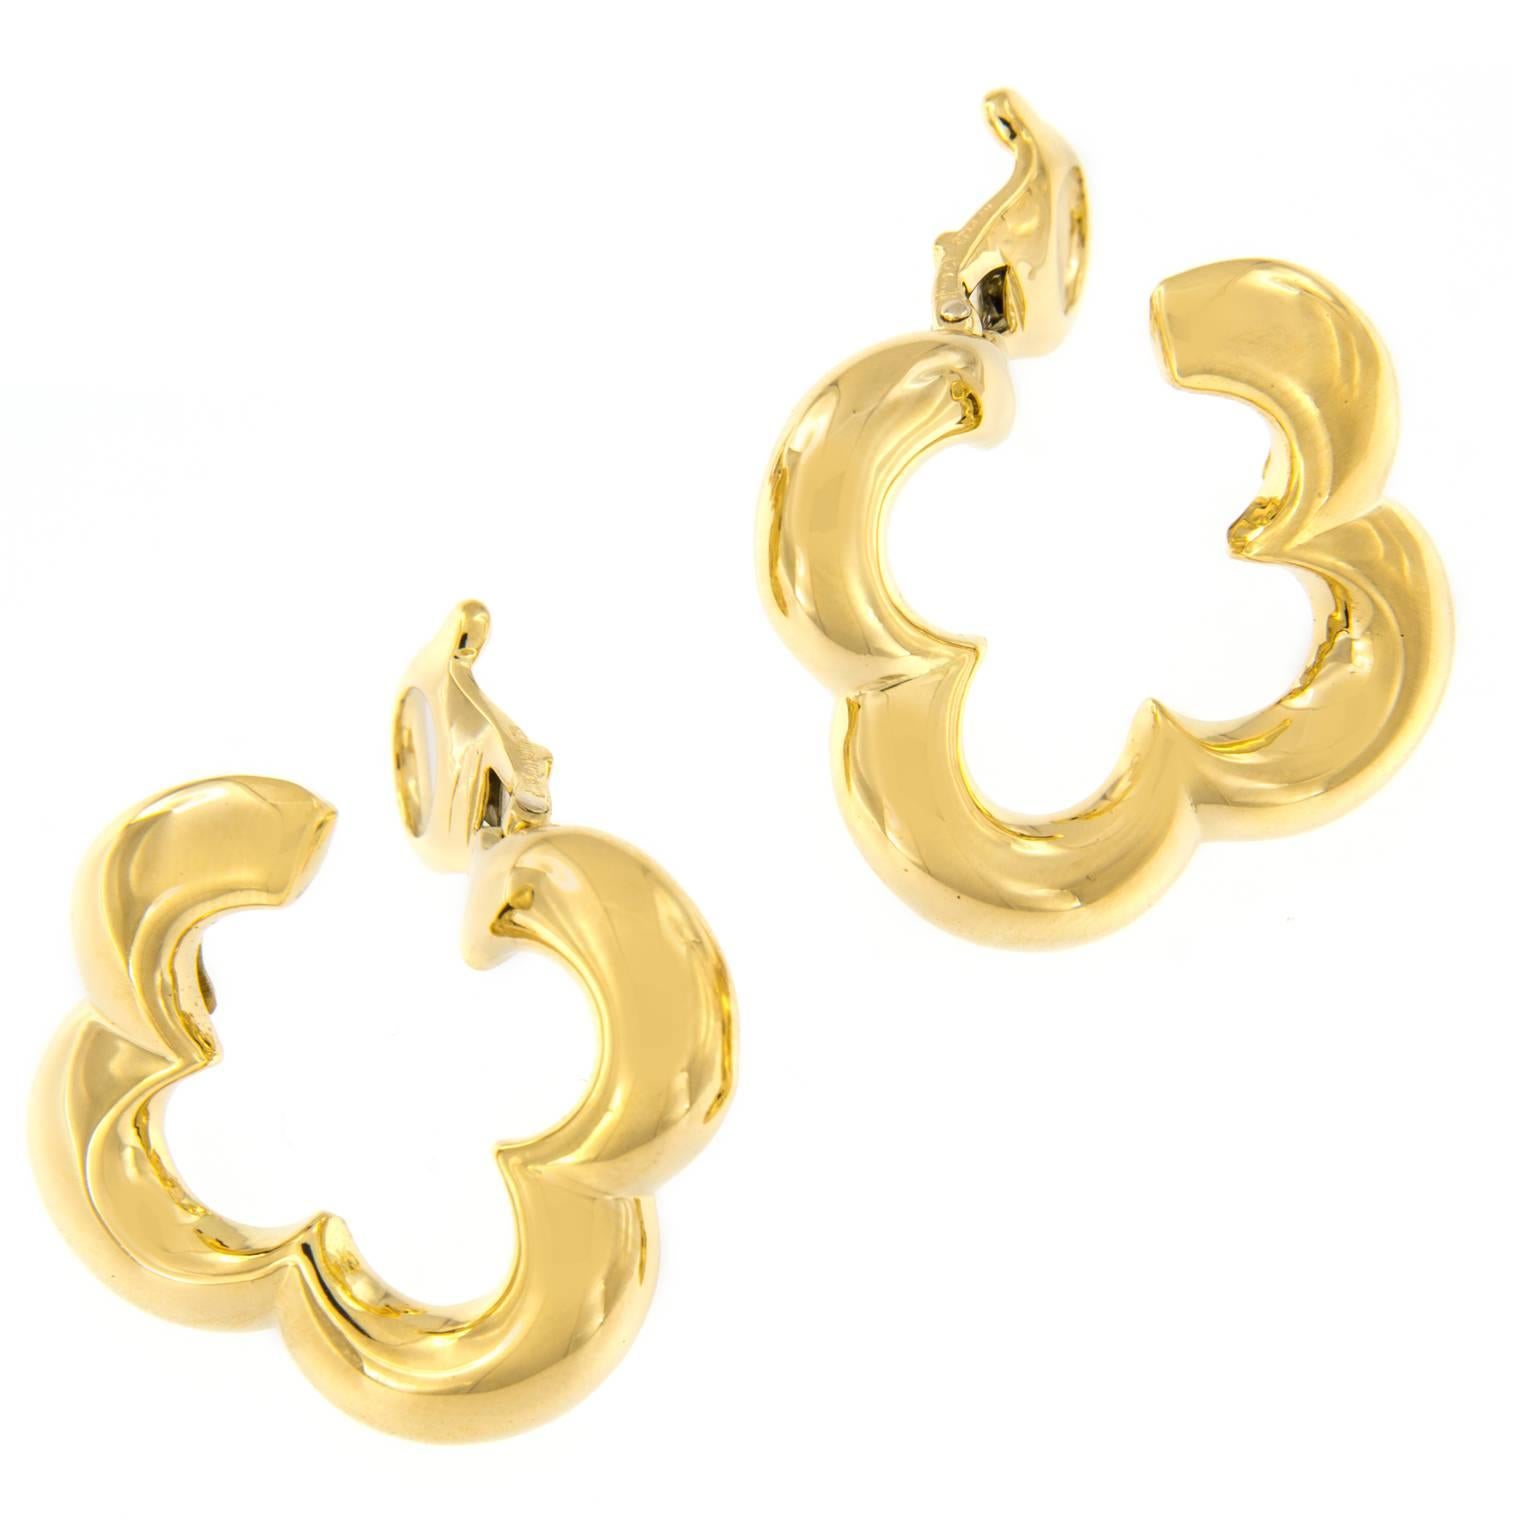 18k yellow gold clip earrings from the iconic Clover Collection by Gemlok of New York. Classic looking & perfect for the office or with that little black dress! 
20.88 mm x 20.57 mm